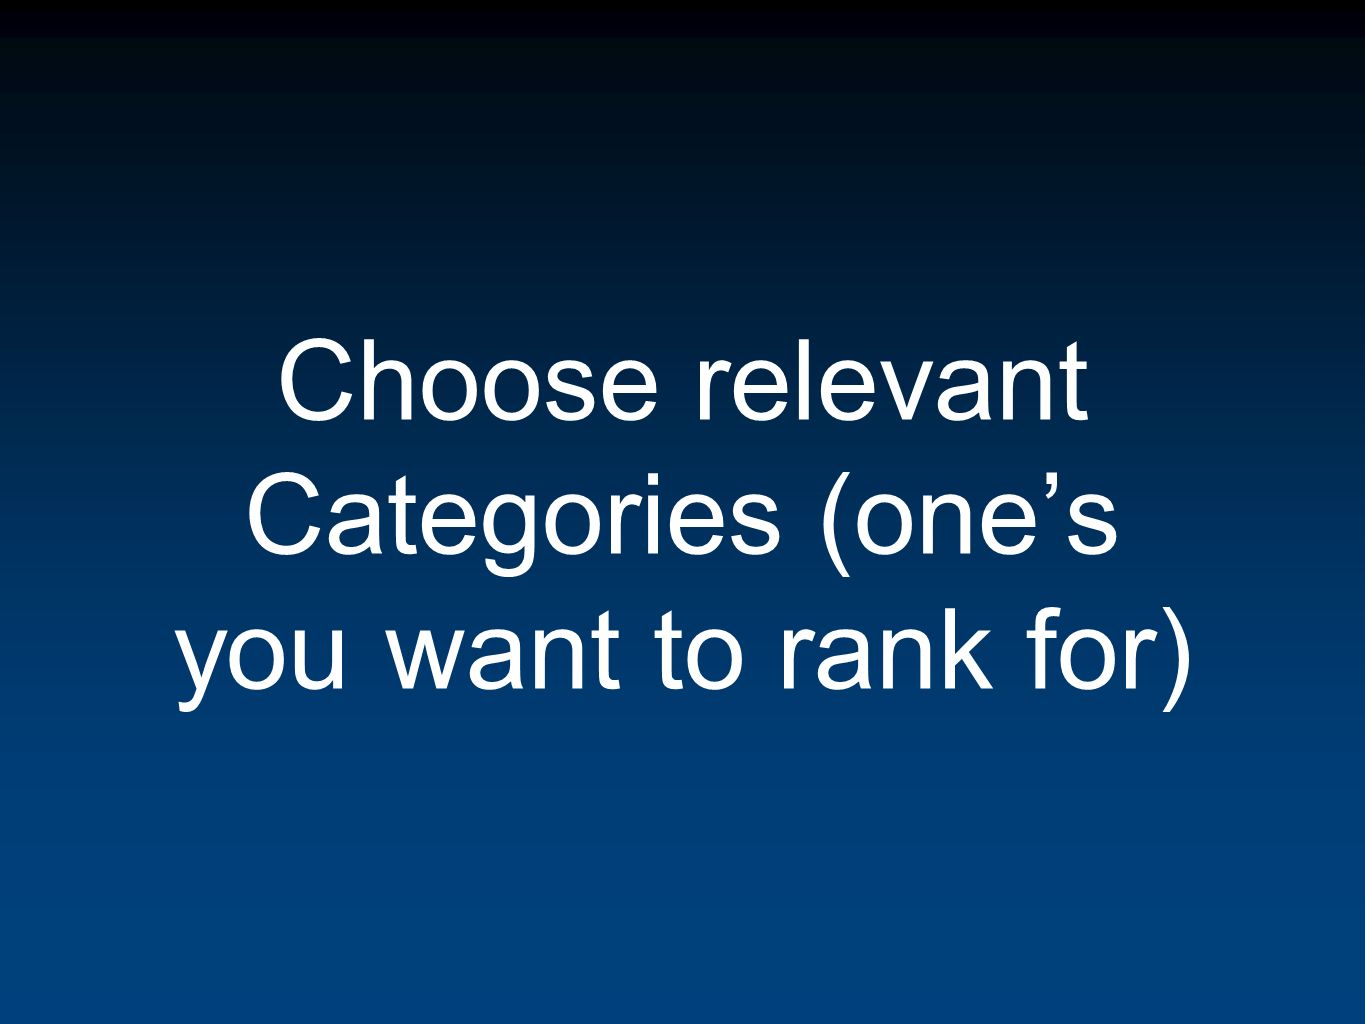 Choose relevant Categories (ones you want to rank for)